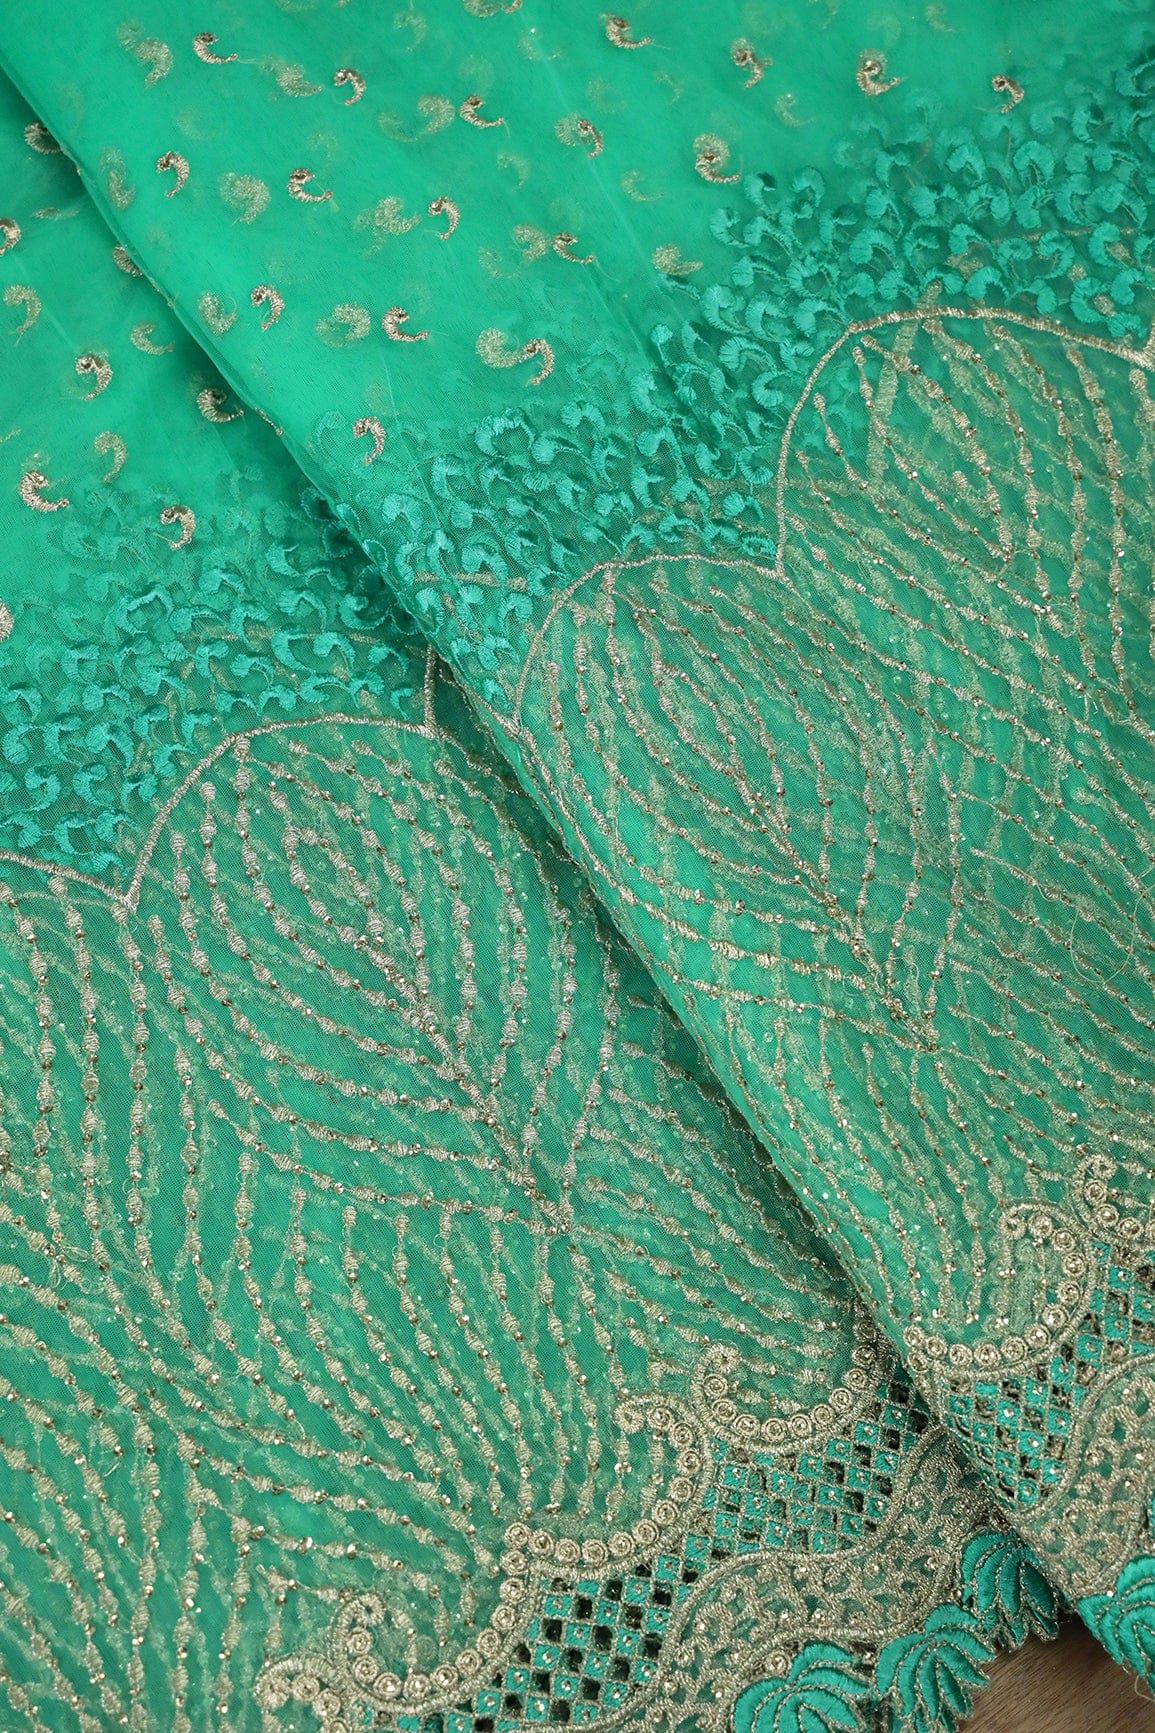 doeraa Embroidery Fabrics Big Width''56'' Mint Green Thread With Zari Traditional Embroidery Work On Mint Green Soft Net Fabric With Border